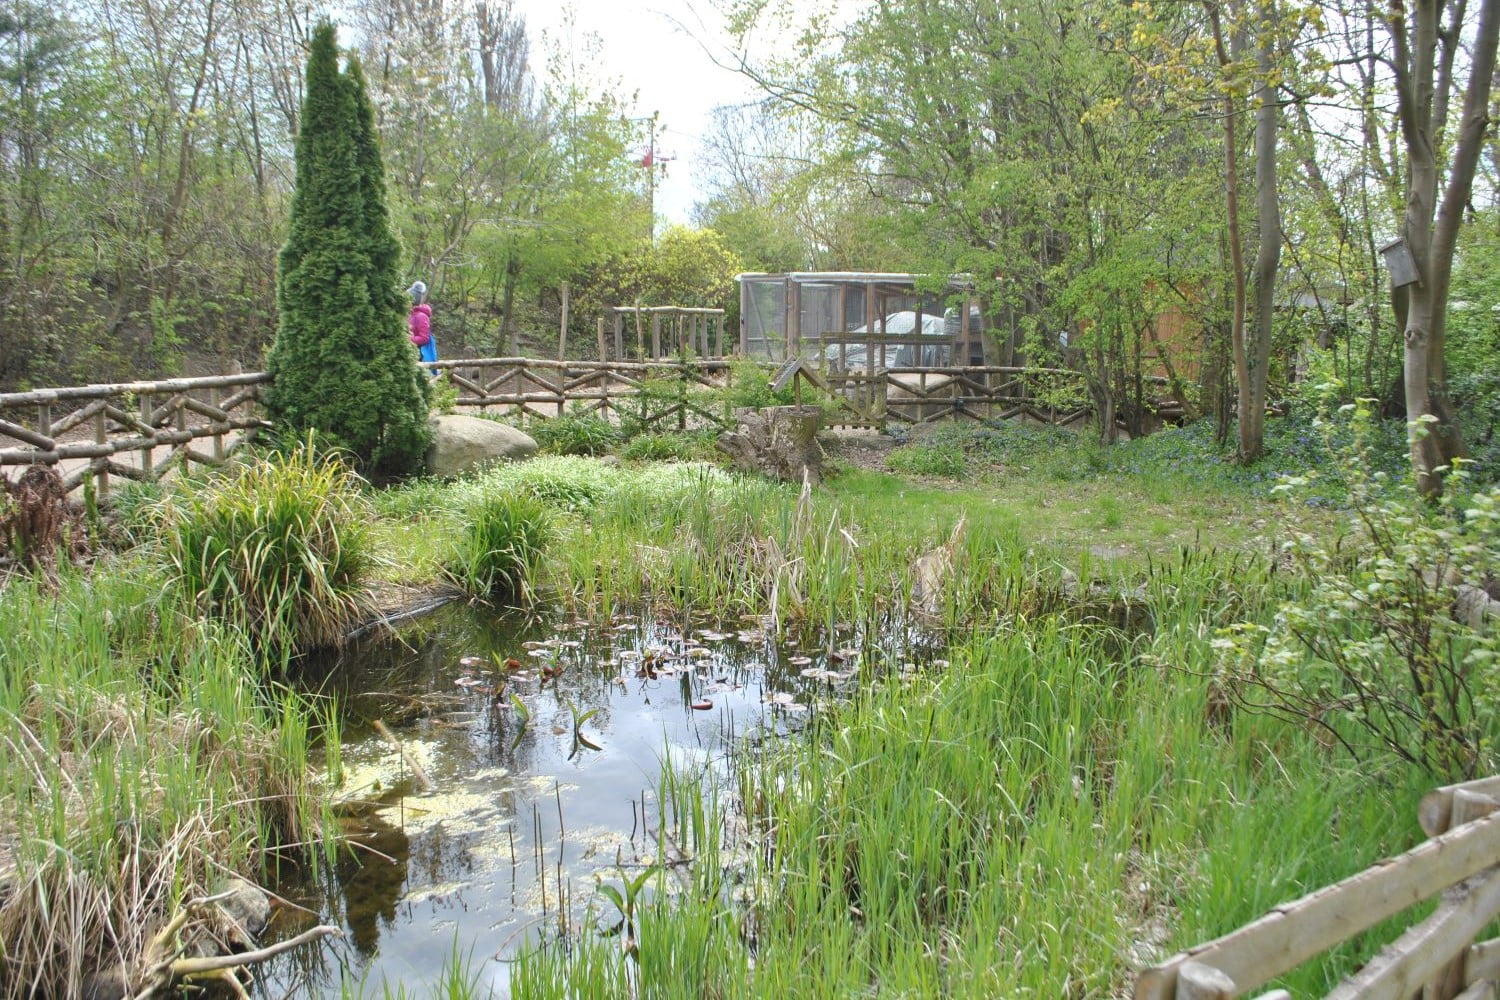 A large fenced wildlife pond filled with greenery in an area of some climate ready school grounds.